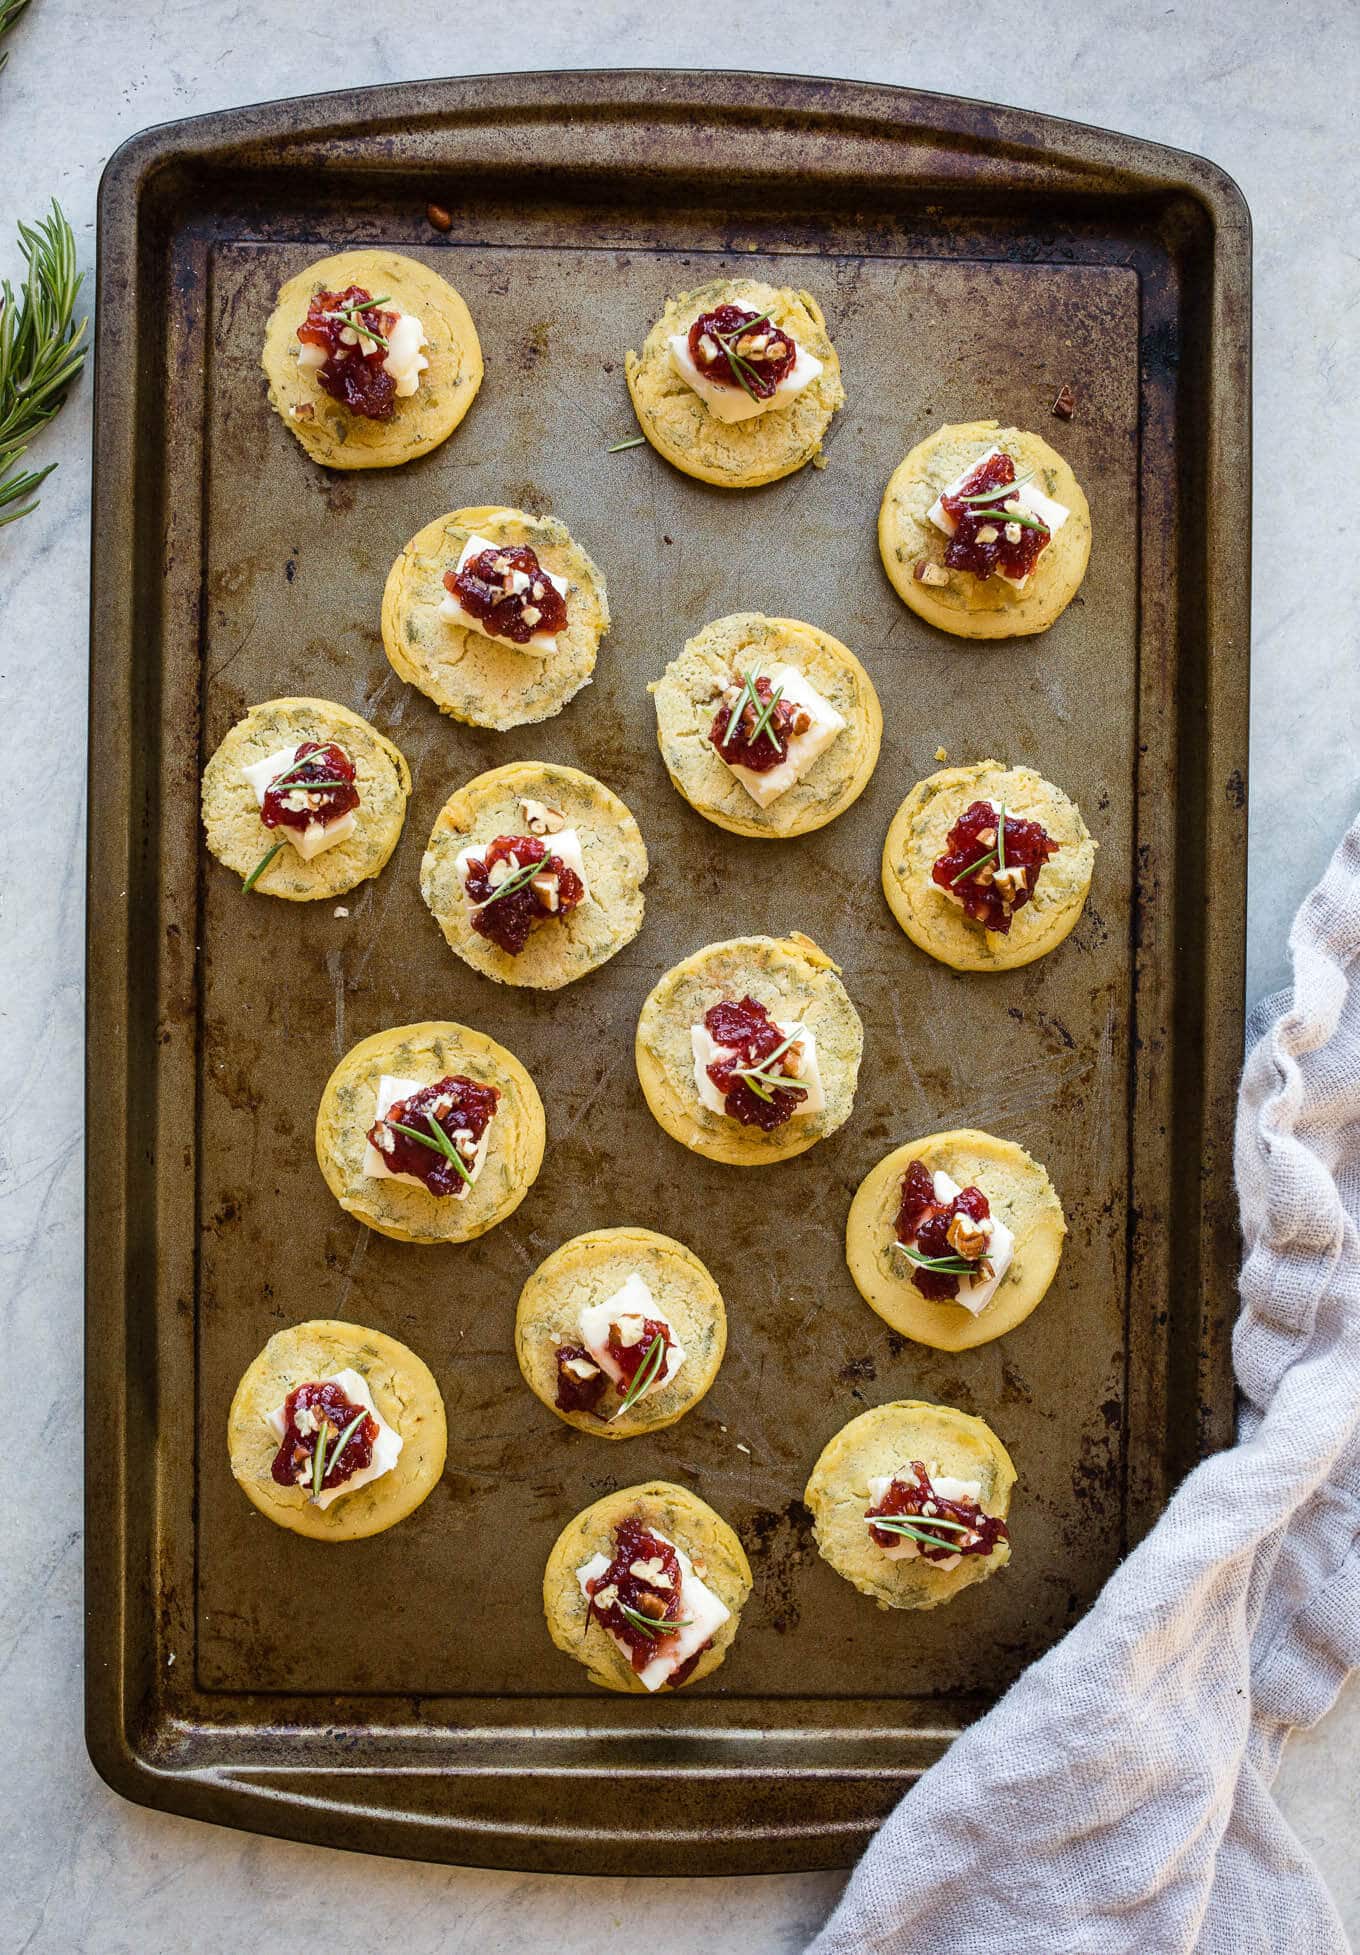 Socca Cranberry Brie Bites are an easy appetizer recipe made from naturally gluten-free chickpea flatbread, brie, cranberry relish, and chopped pecans. Gluten-free.